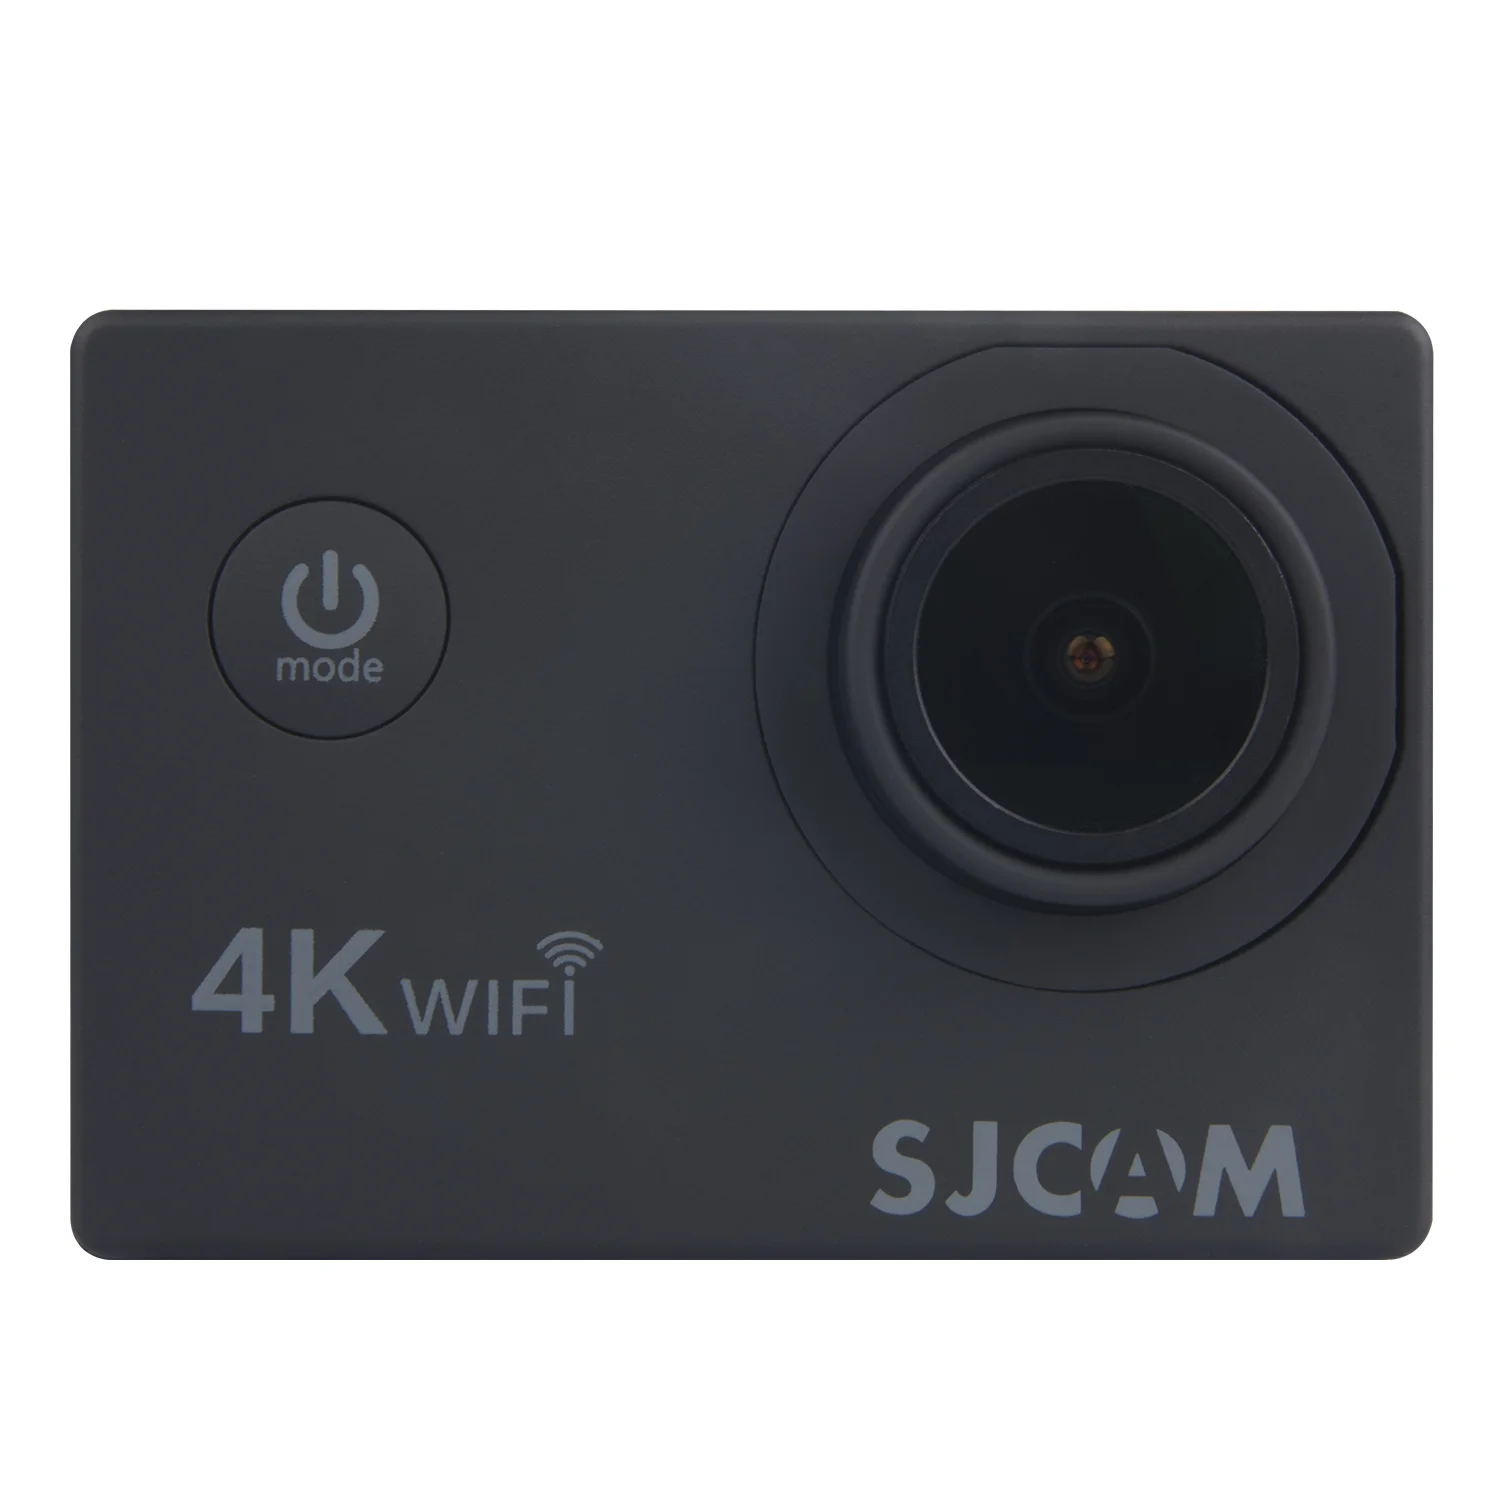 SJCAM SJ4000 AIR With WiFi Supports Mobile Phone APP Real Time Viewing  Outdoor Sports Waterproof Camera Helmet Cycling Recor| | - AliExpress